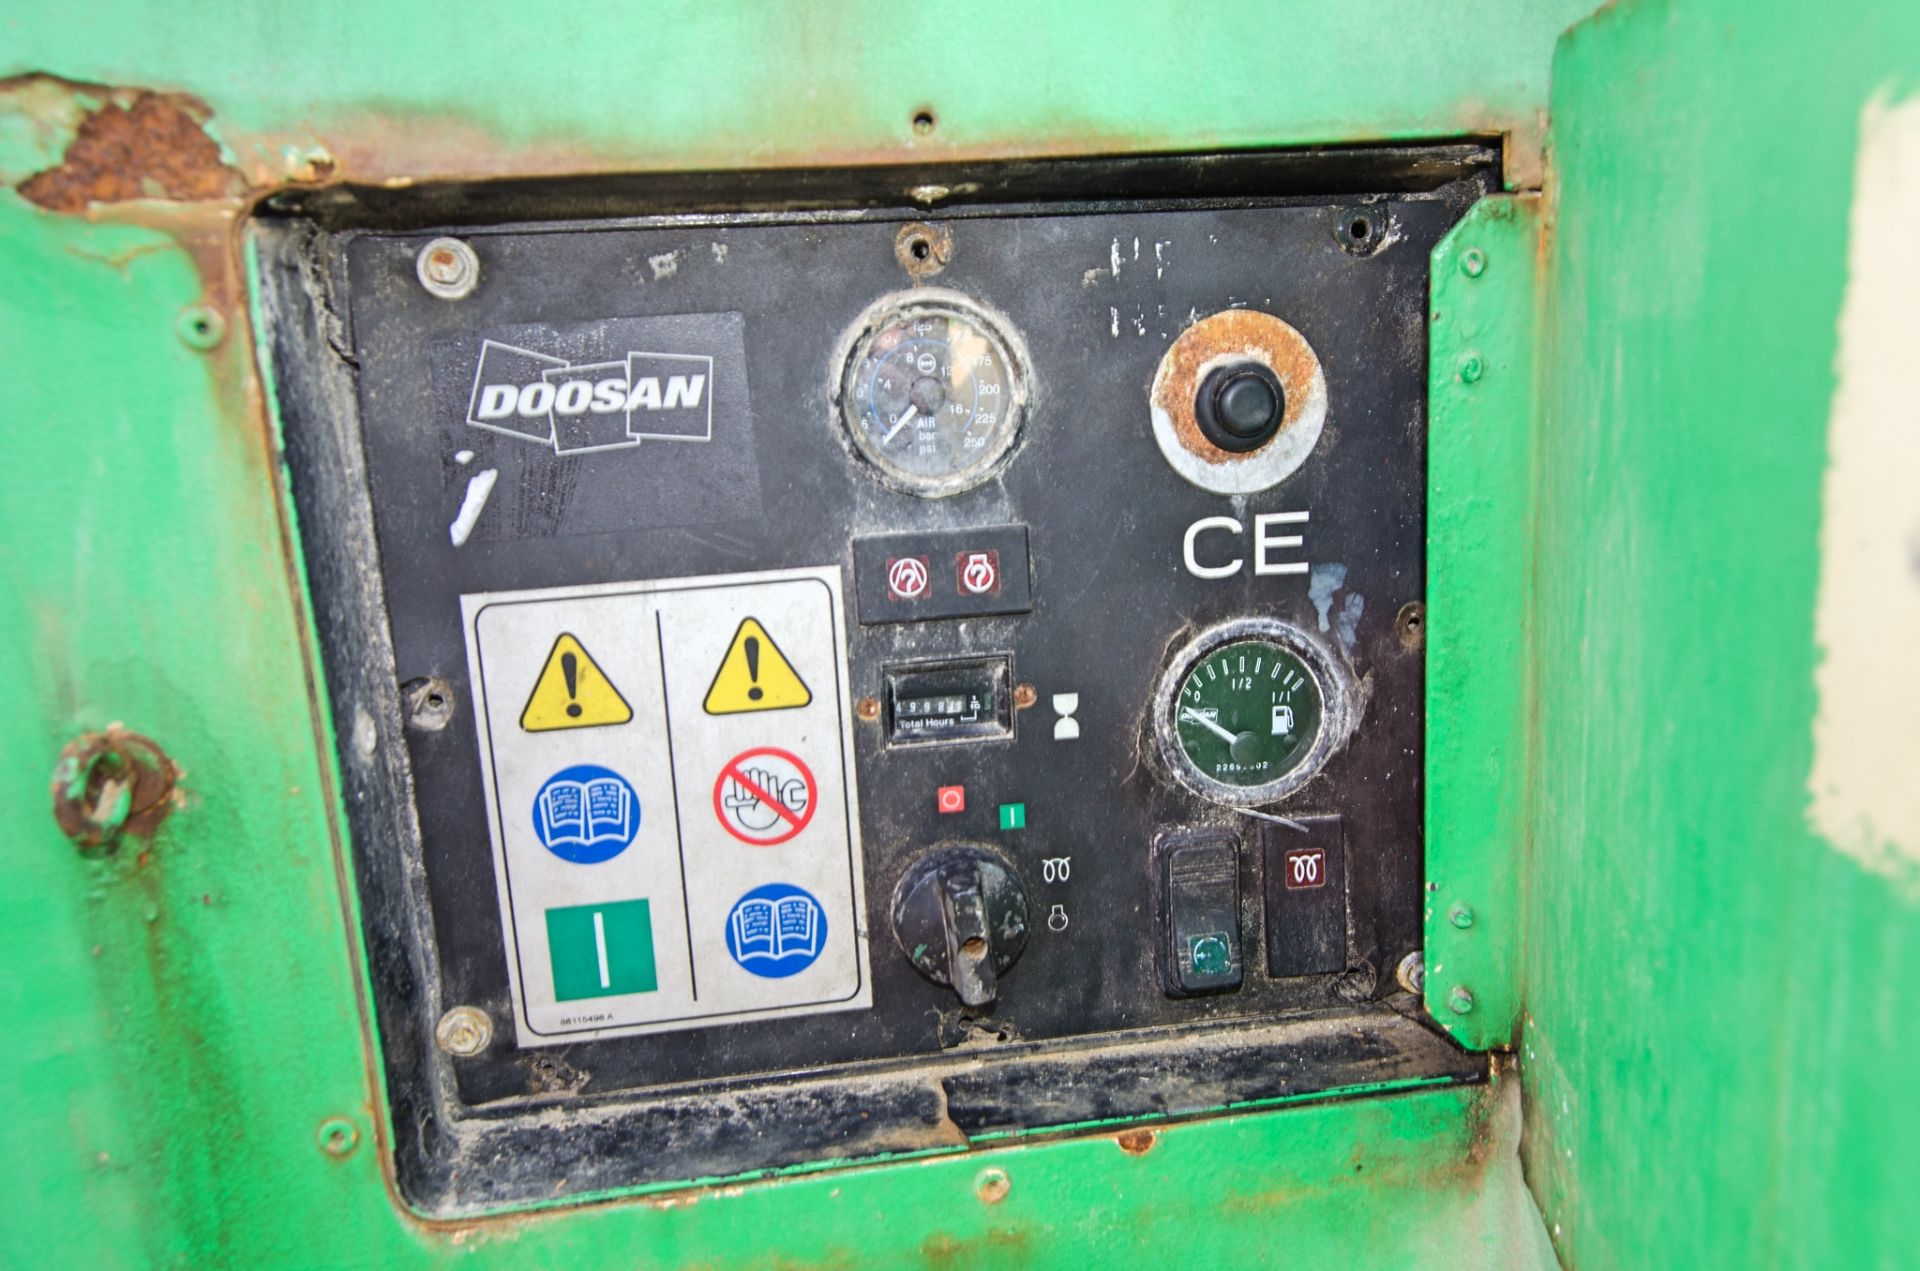 Doosan 9110 diesel driven fast tow mobile air compressor Year: 2013 S/N: 659402 Recorded hours: 4998 - Image 5 of 7